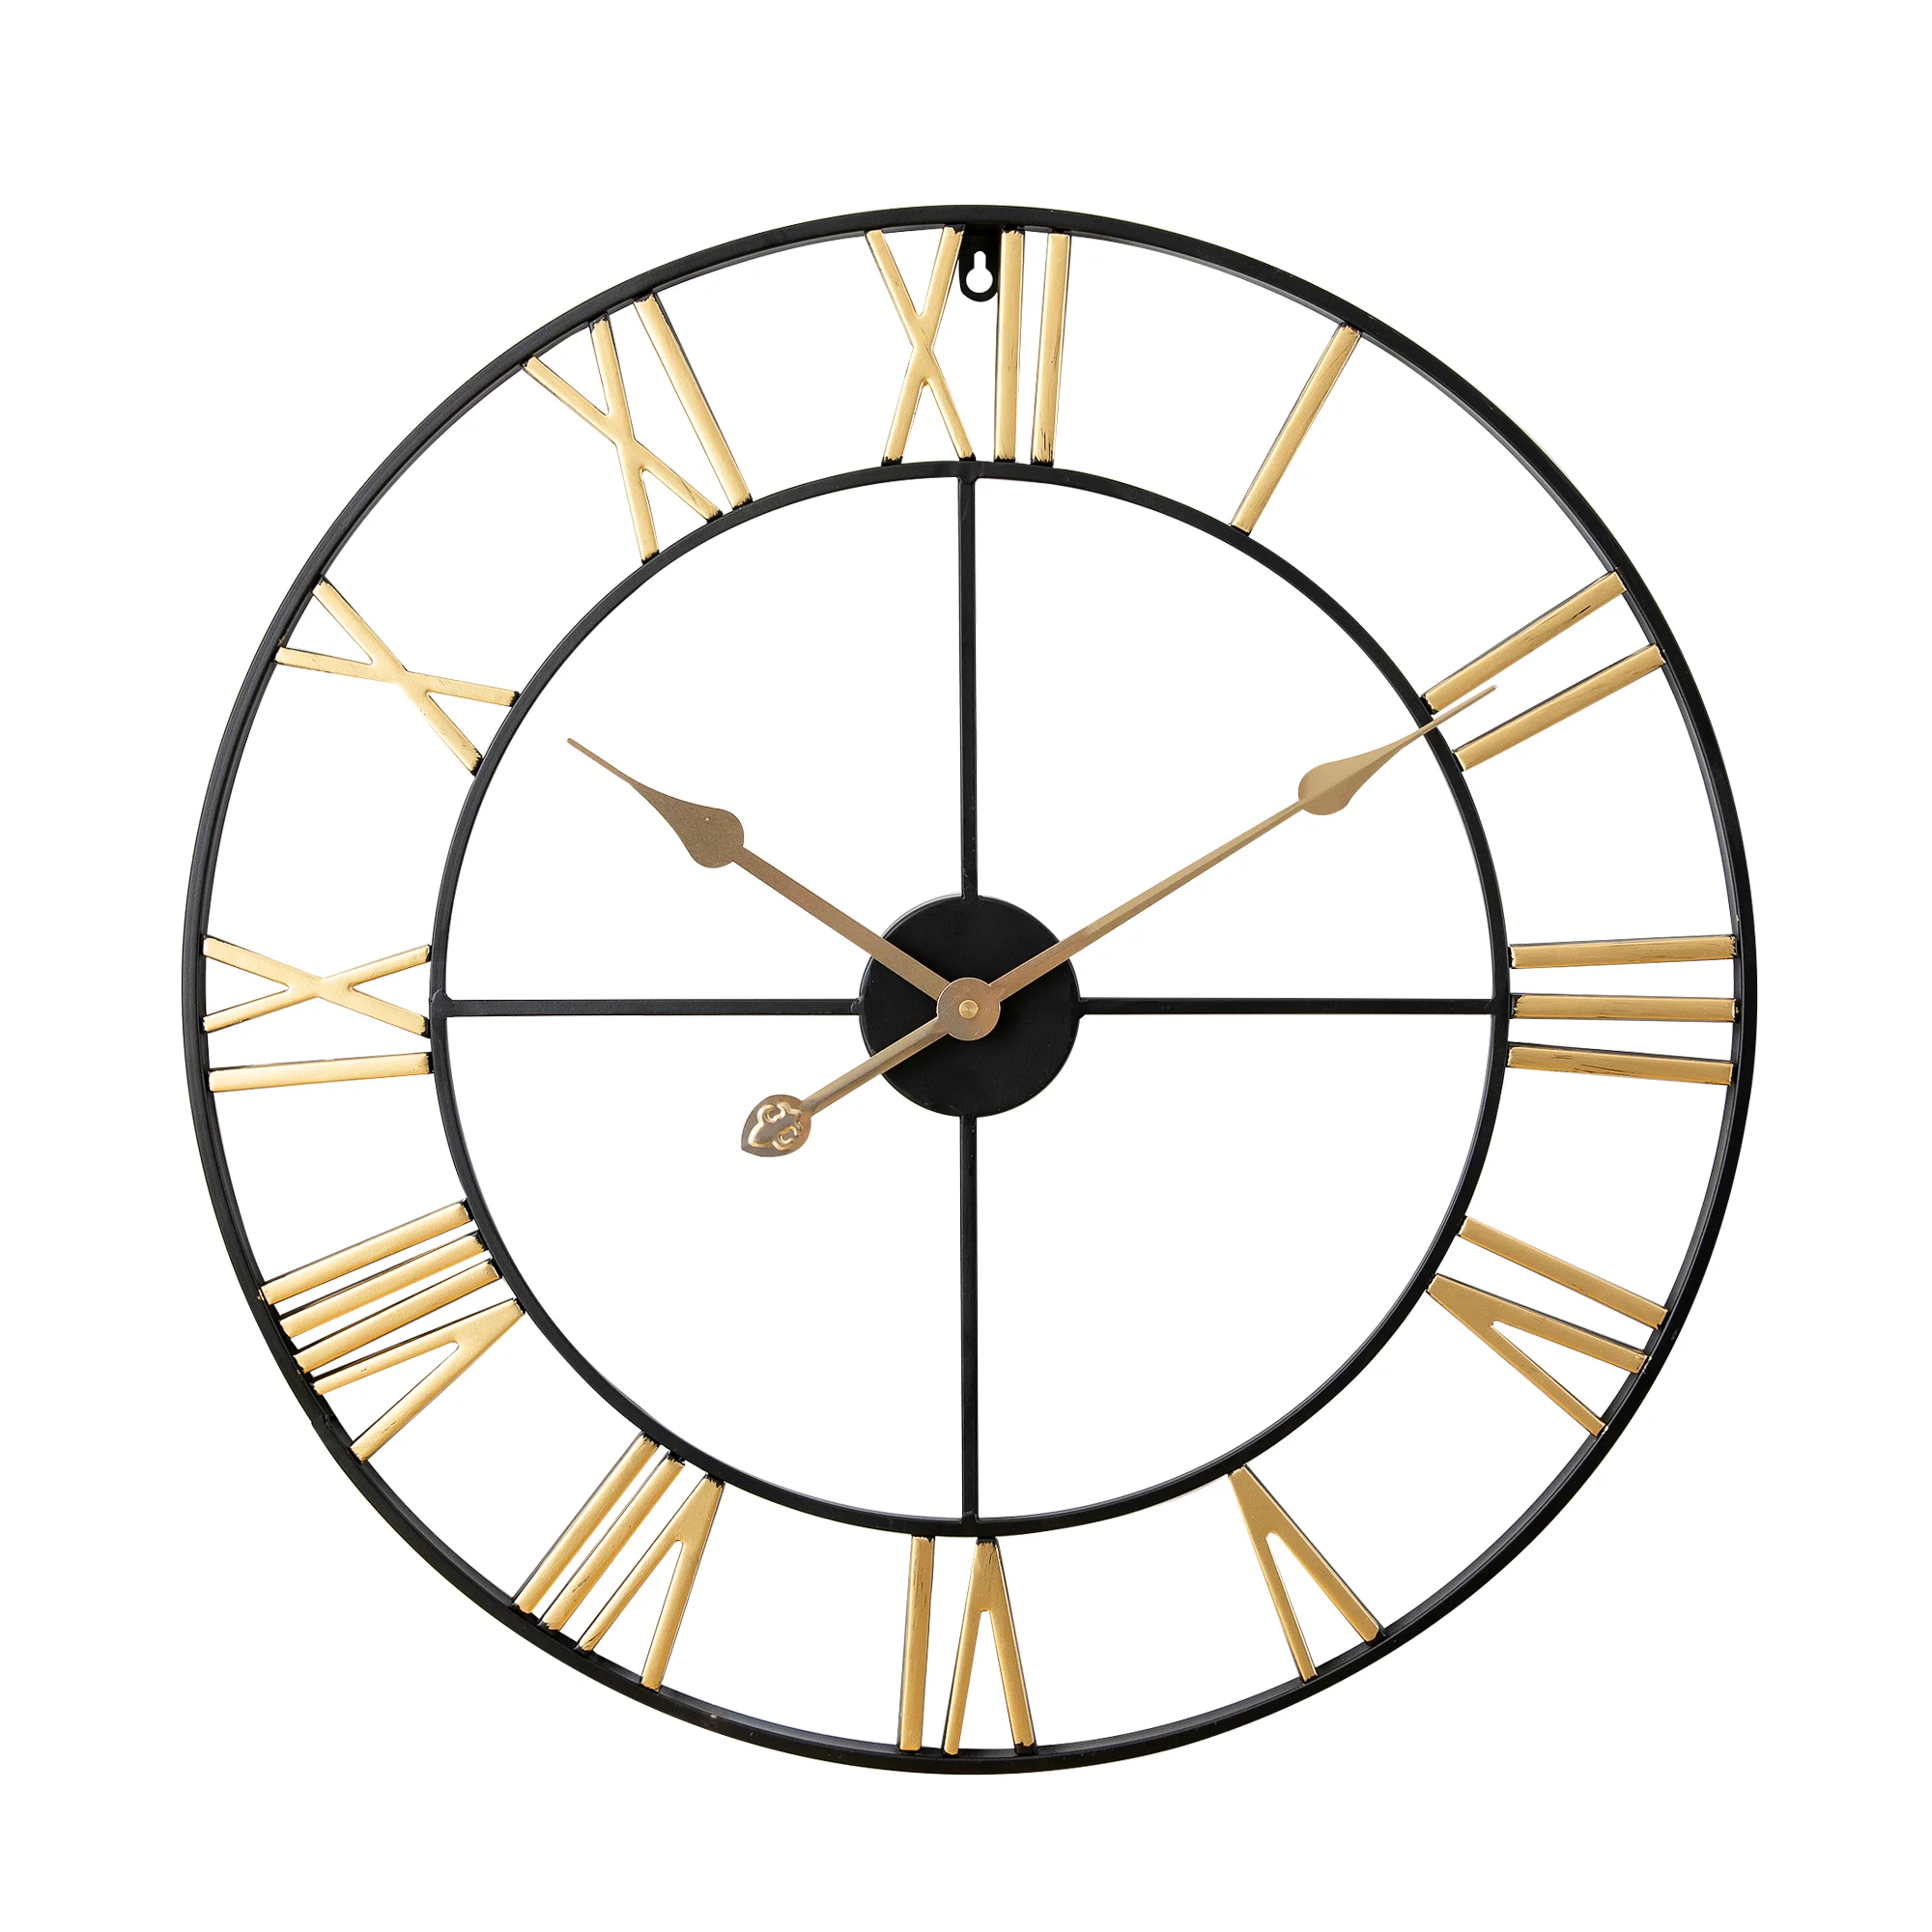 

60cm Home Decorative Roman Numeral Style Round Shaped Black Analog Metal Clock 23.6inch 60cm Wall Clock for Living Room